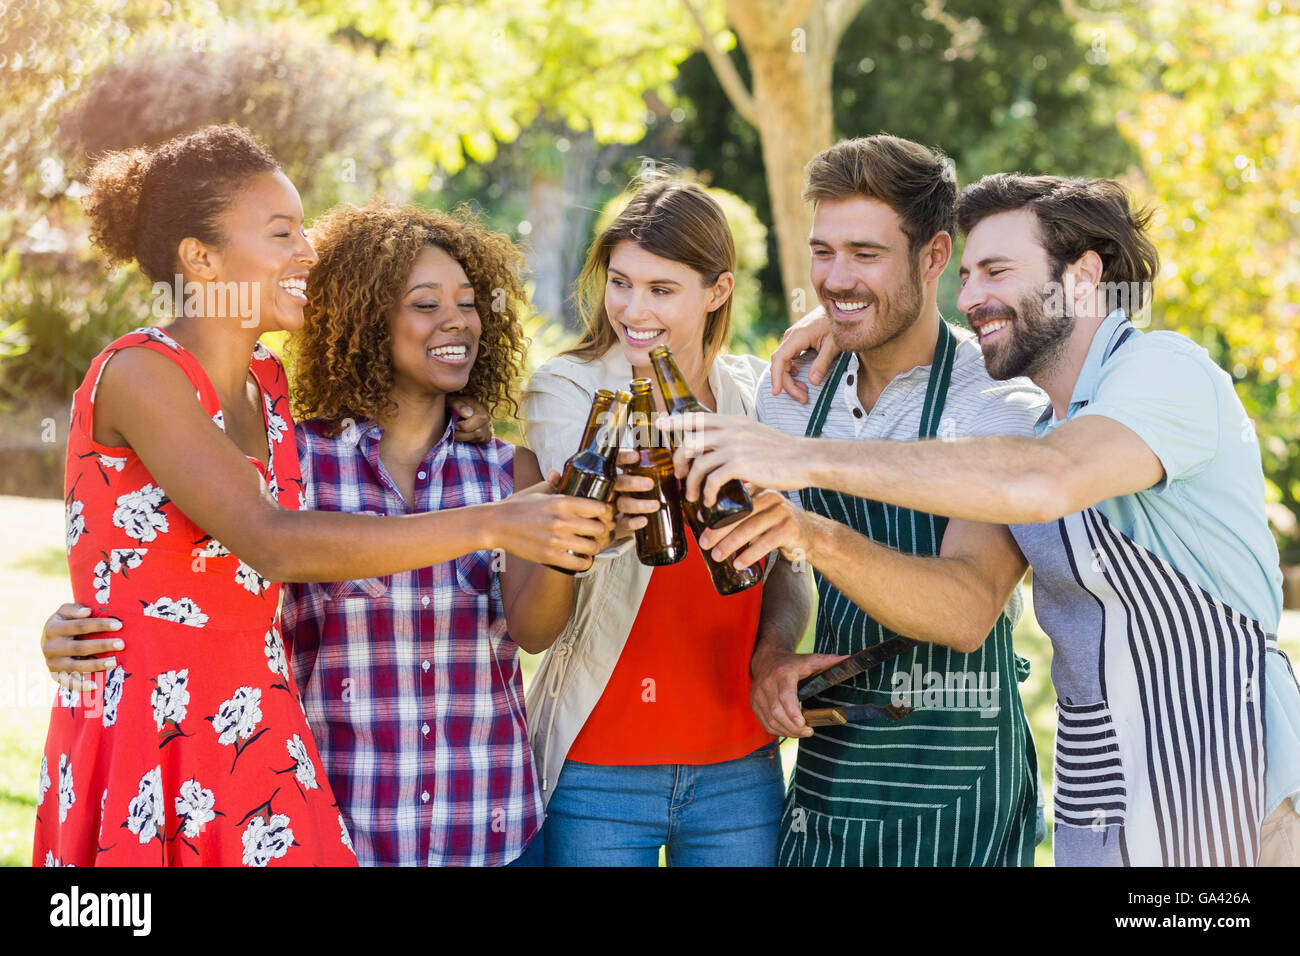 Couple having beer on a pickup truck bonnet Stock Photo - Alamy